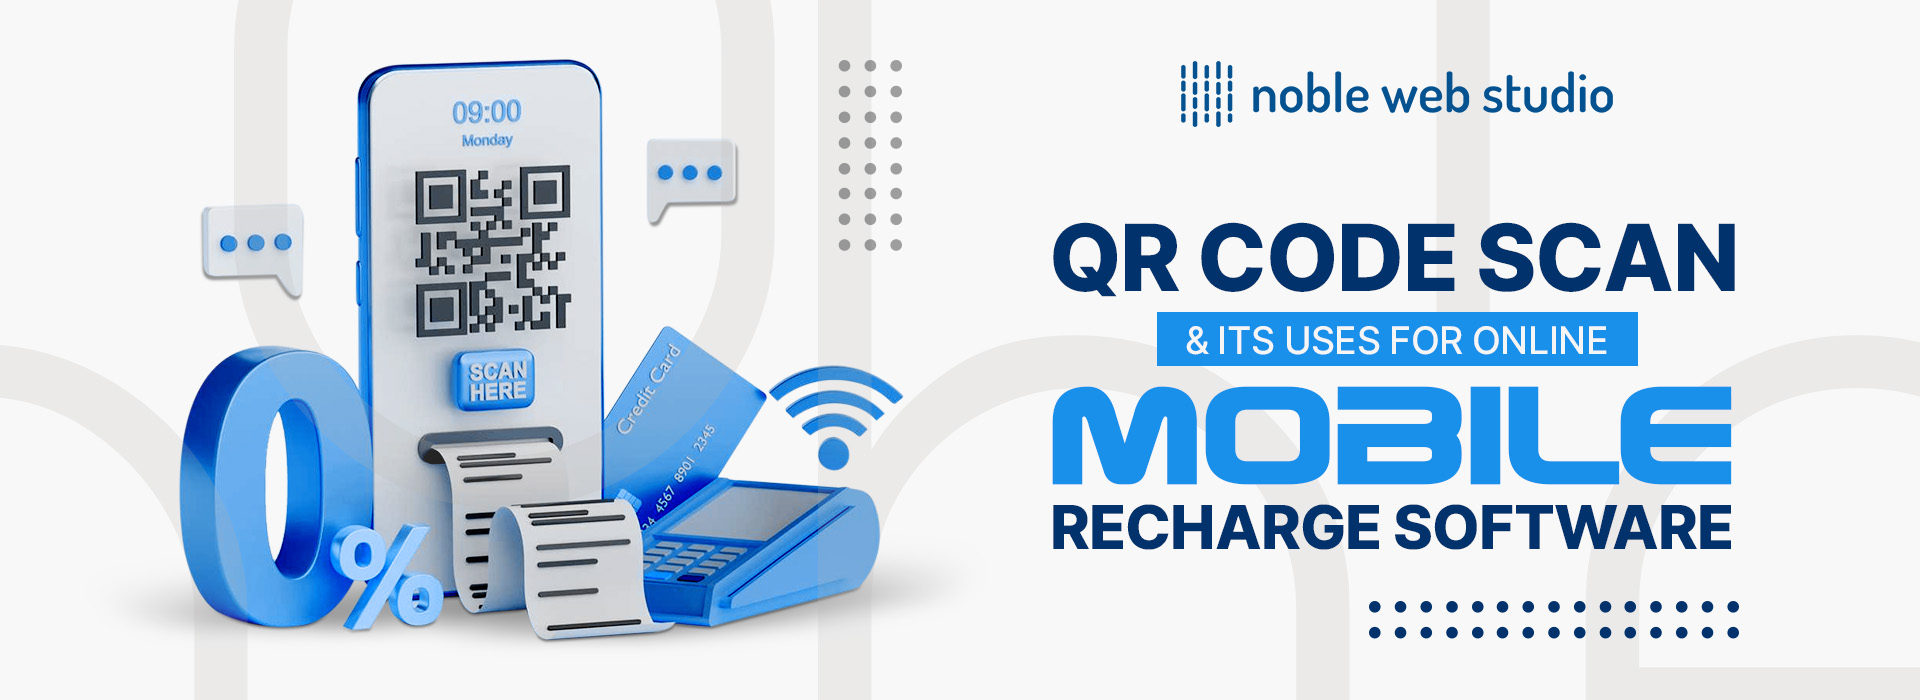 QR code scan & its uses for online mobile recharge software